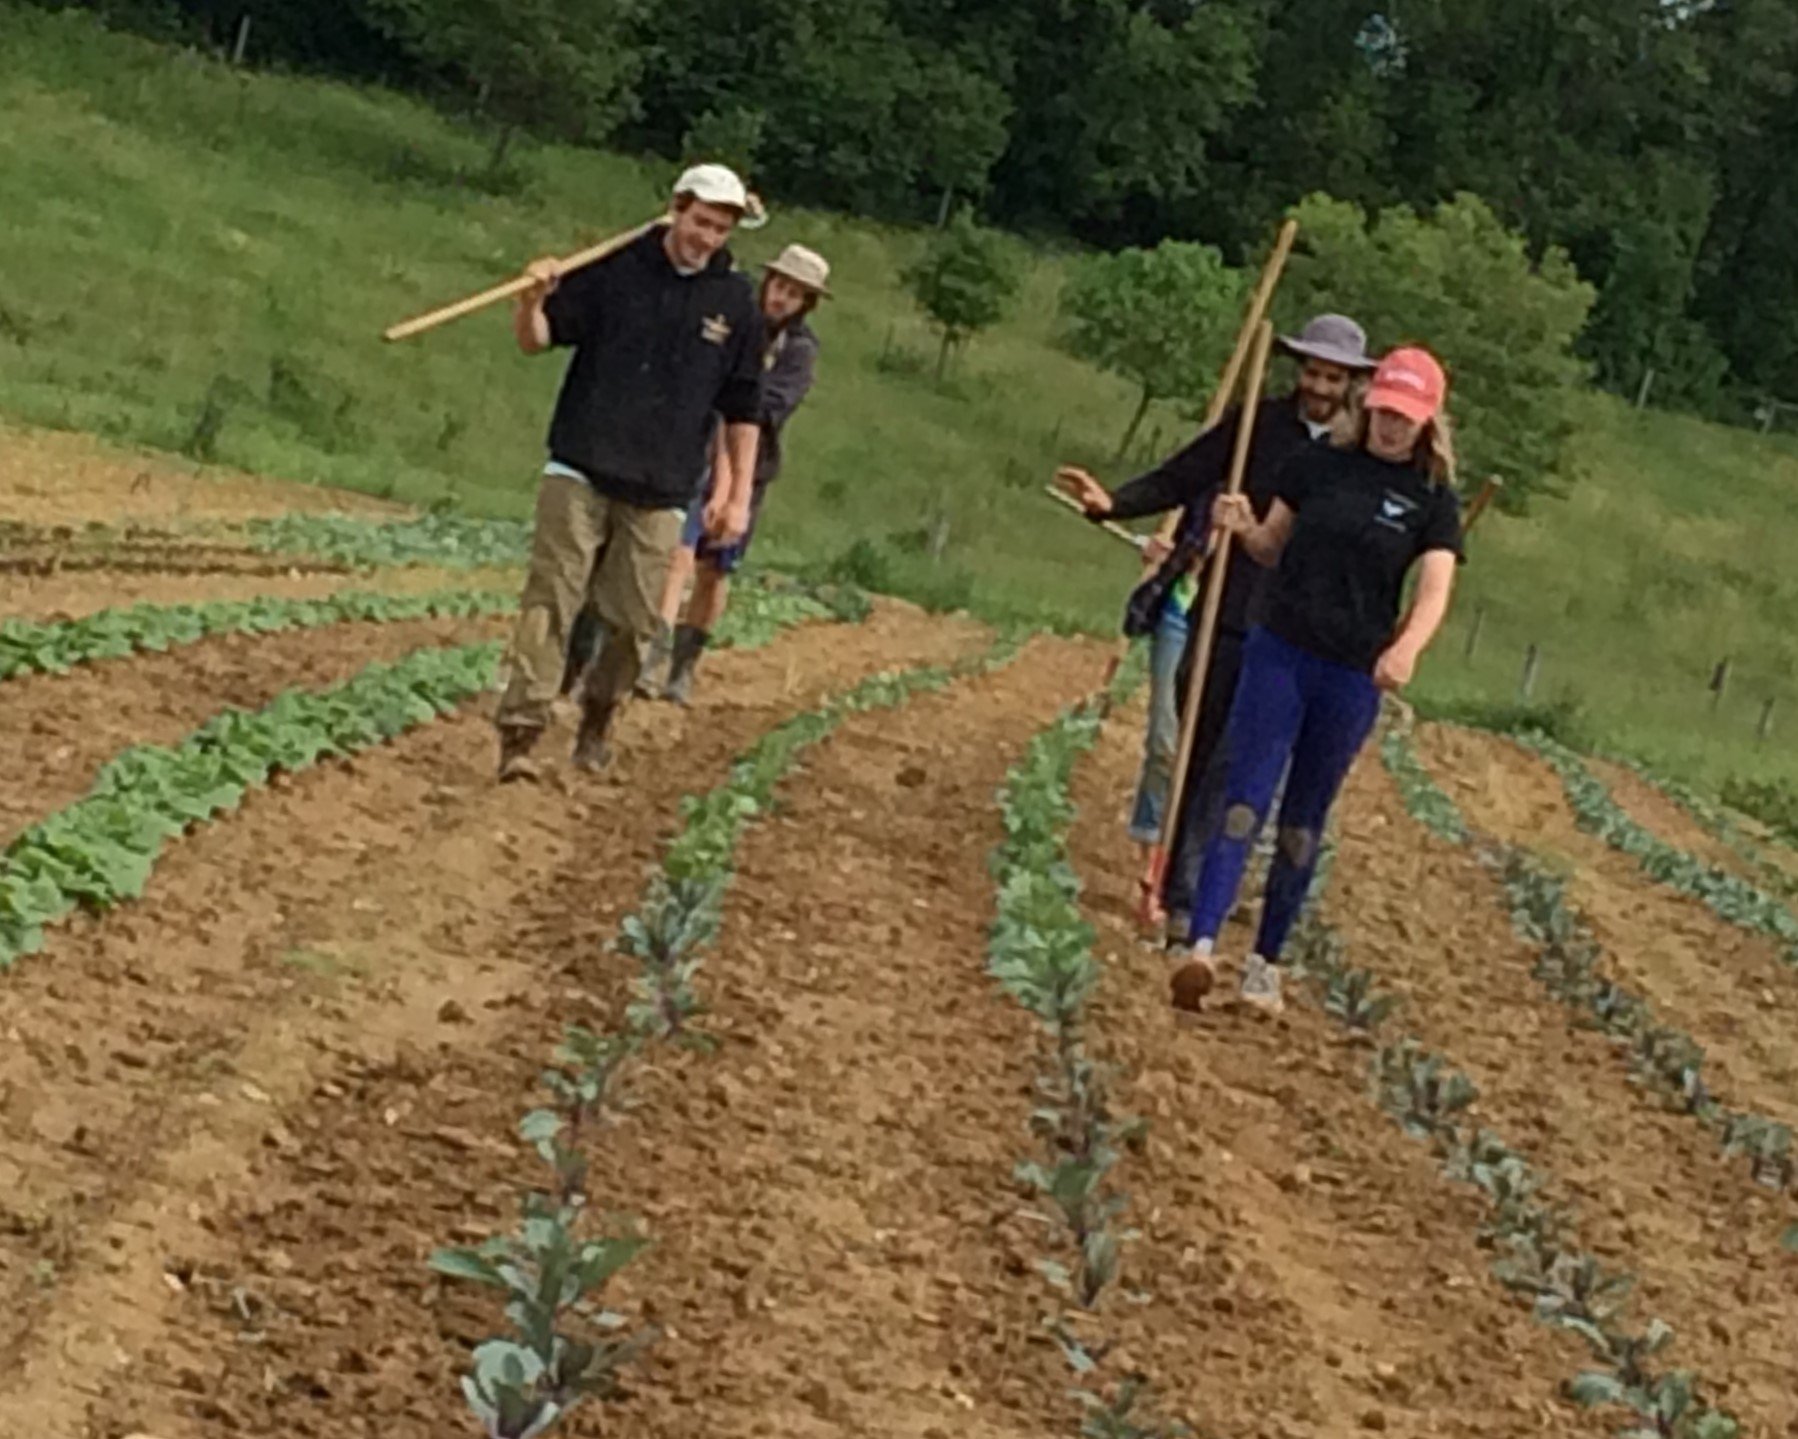 Next Happening: Dickinson College Farm Field Notes for Week of May 27th